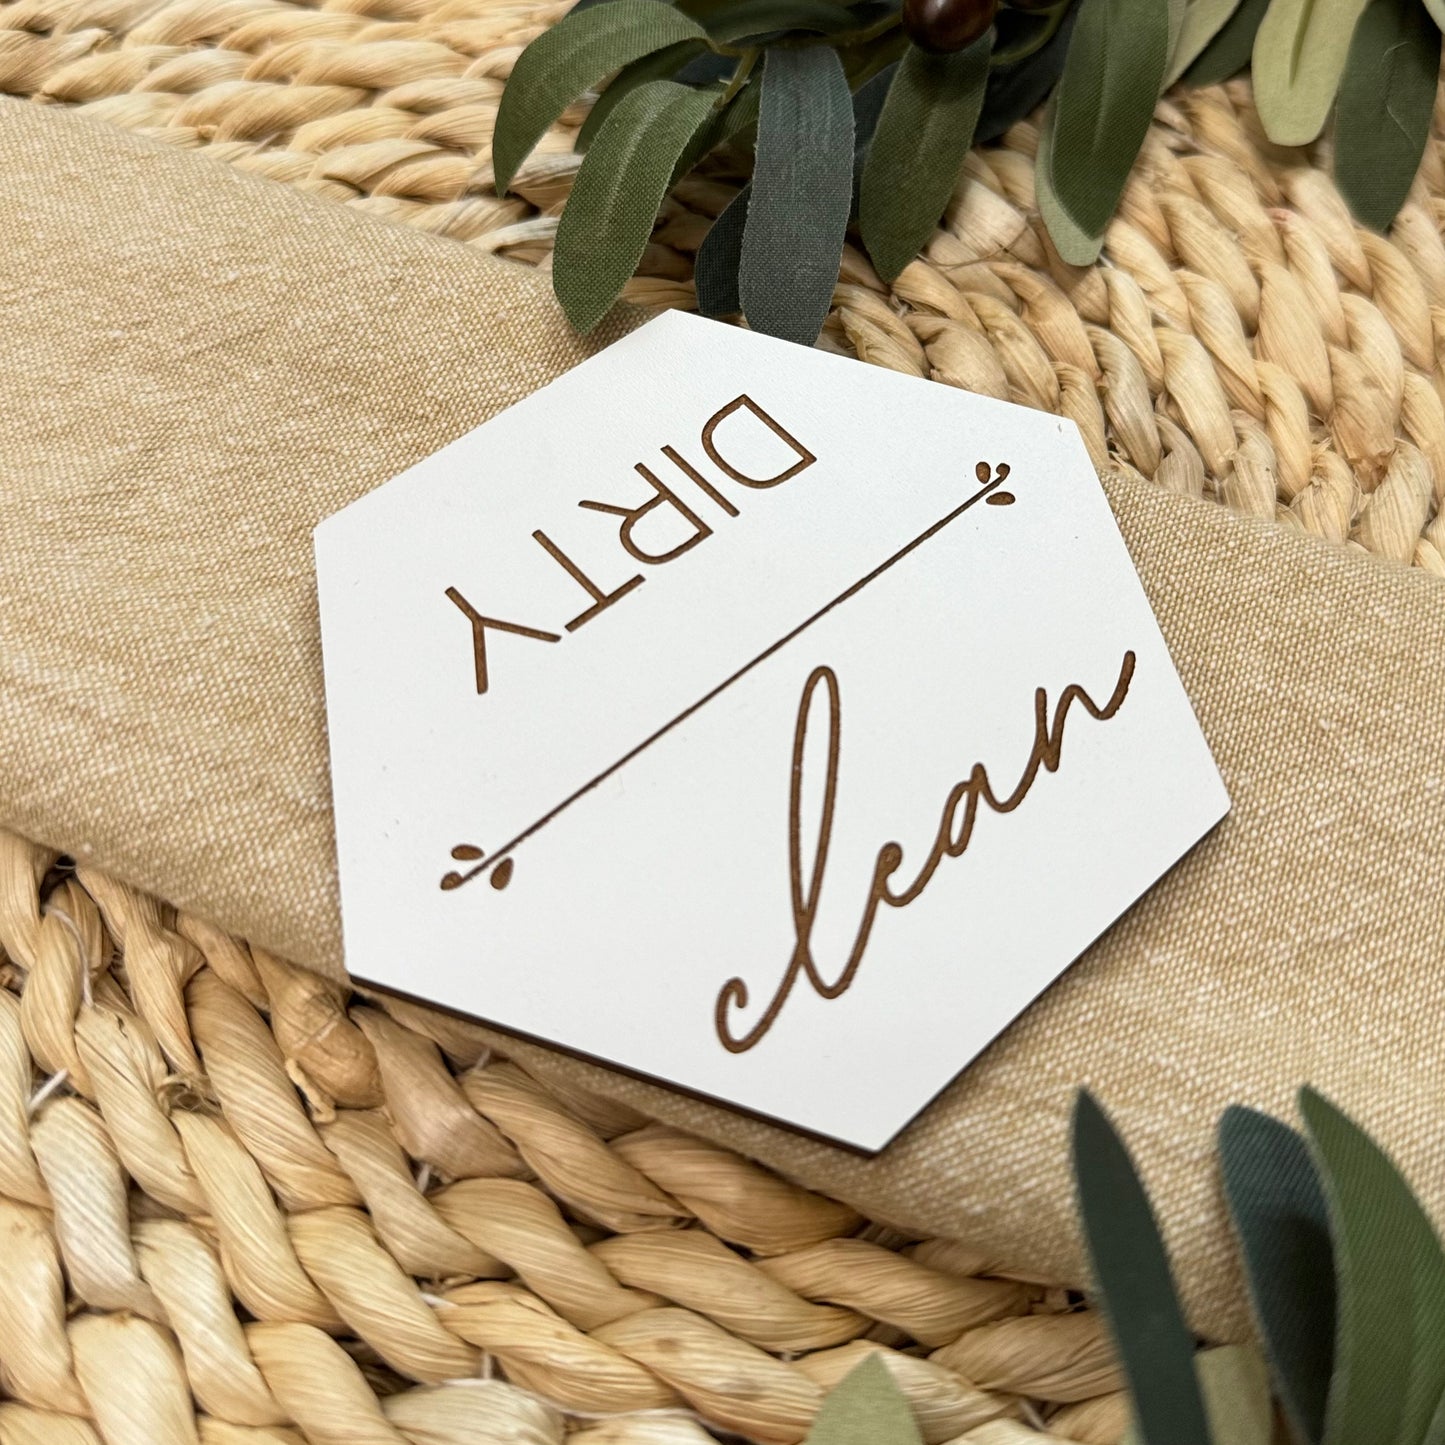 Clean Dirty Engraved Wooden Dishwasher Magnet